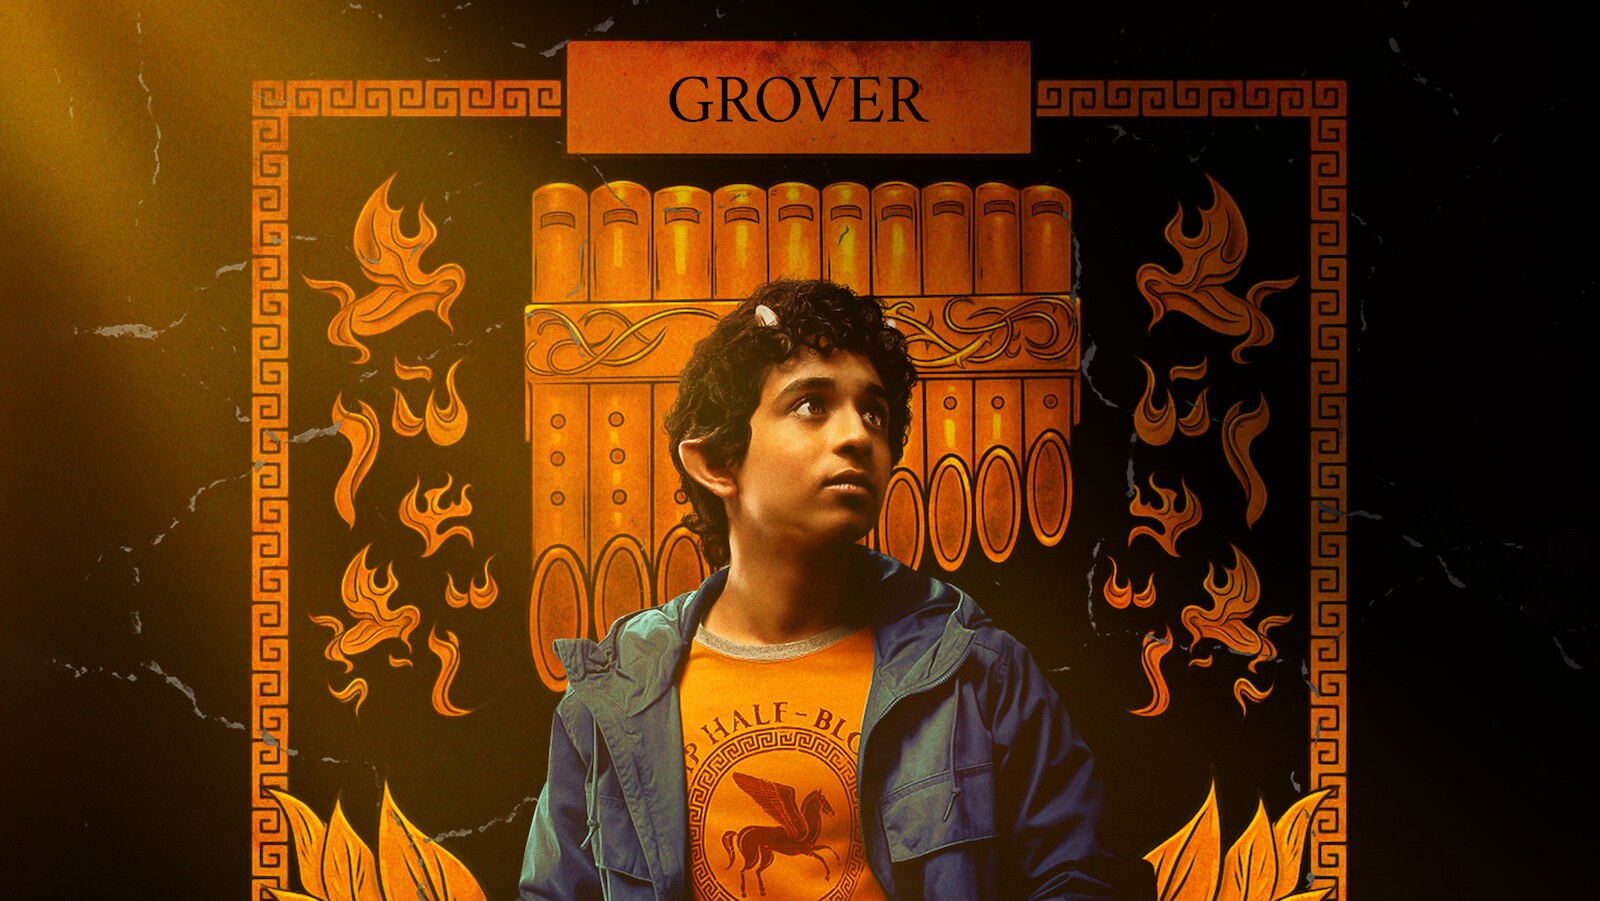 Percy Jackson and the Olympians Character Art - Grover Underwood